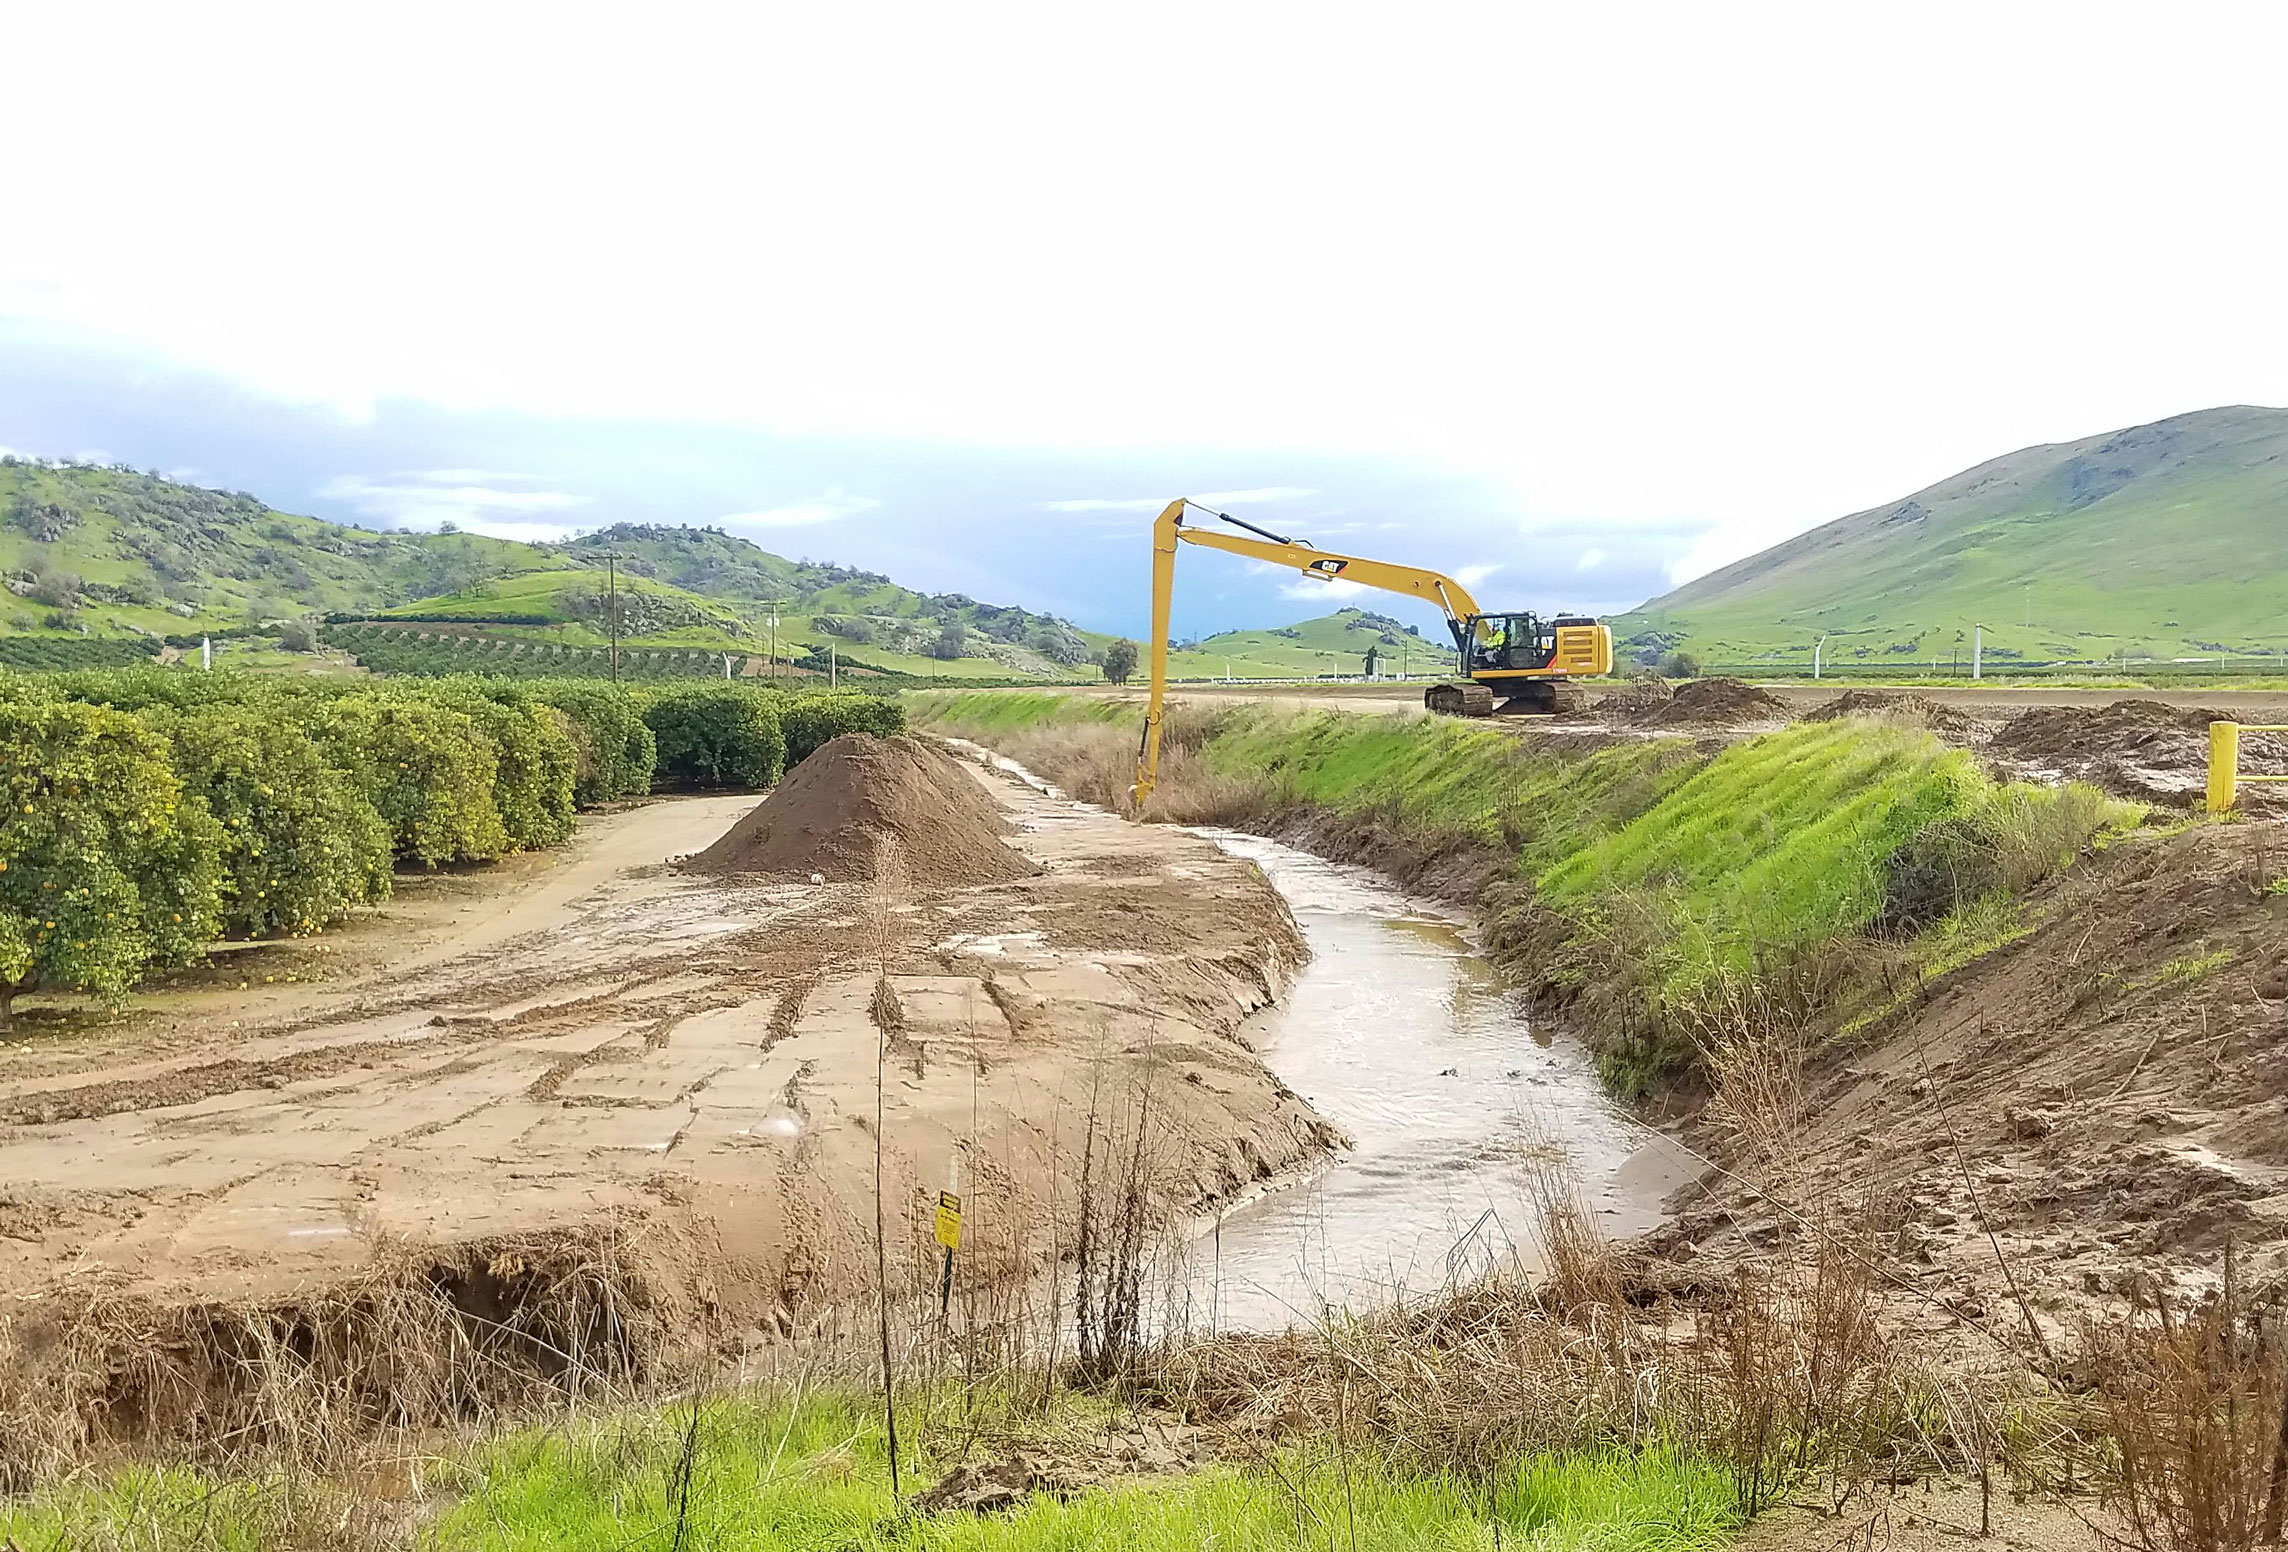  Drainage ditch being cleared of debris in the Orange Cove Section of the Friant Kern Canal 